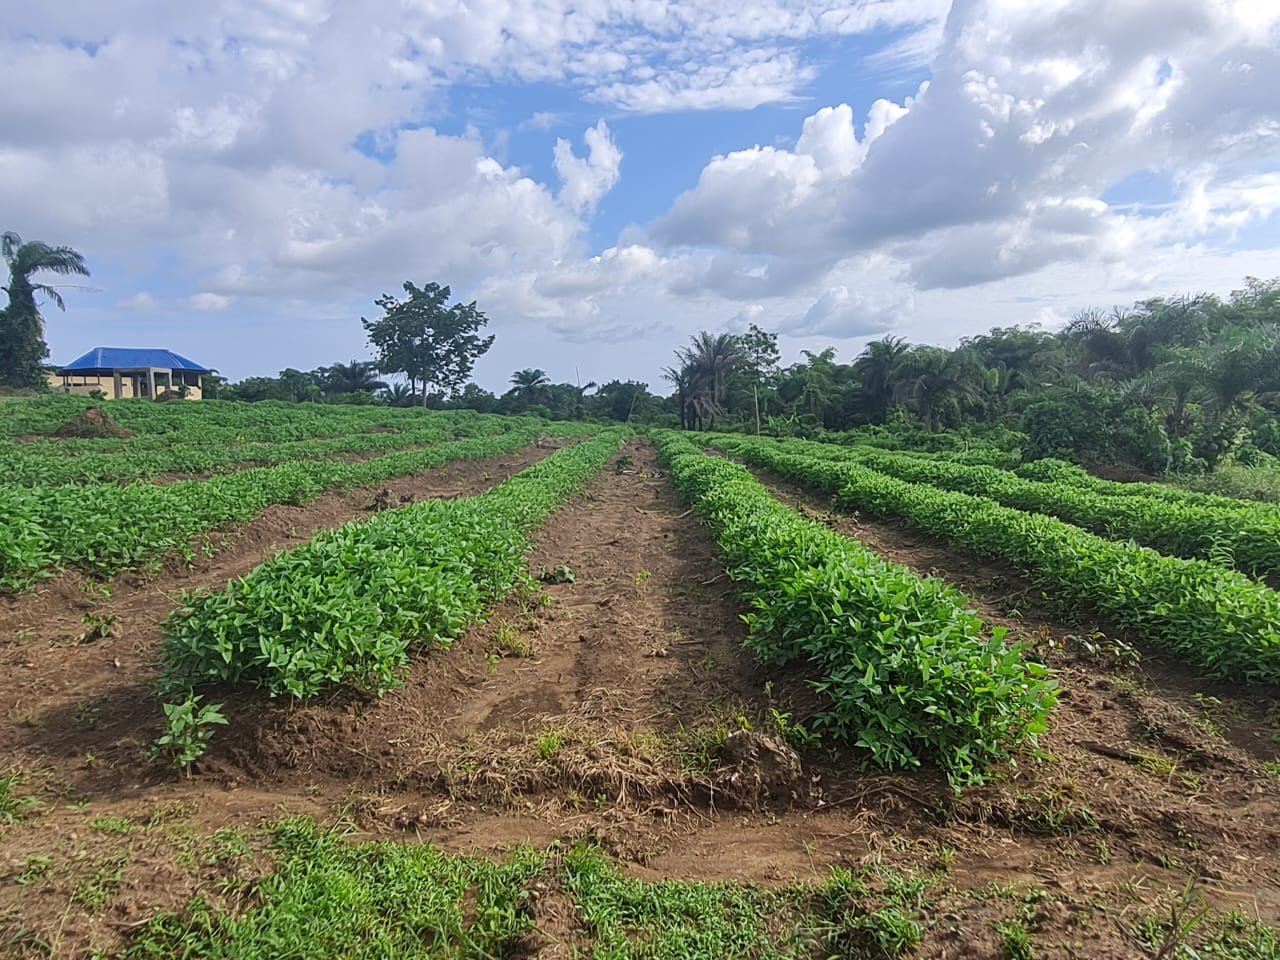  Hope Farm, Liberia - The first multi cropping organic farm in the country. 